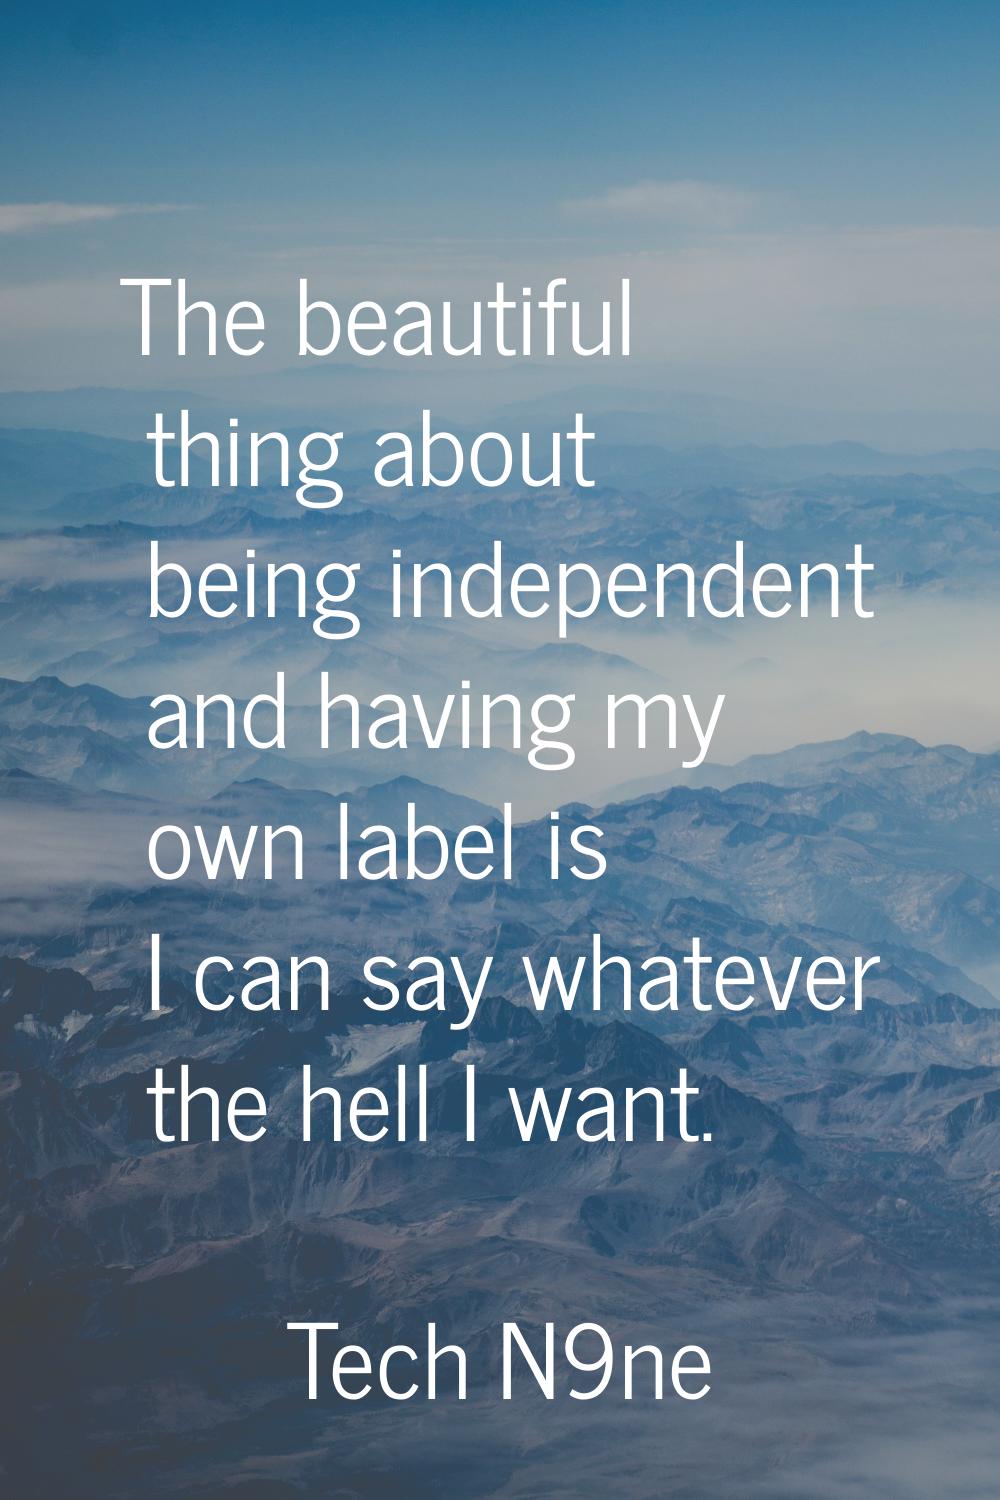 The beautiful thing about being independent and having my own label is I can say whatever the hell 